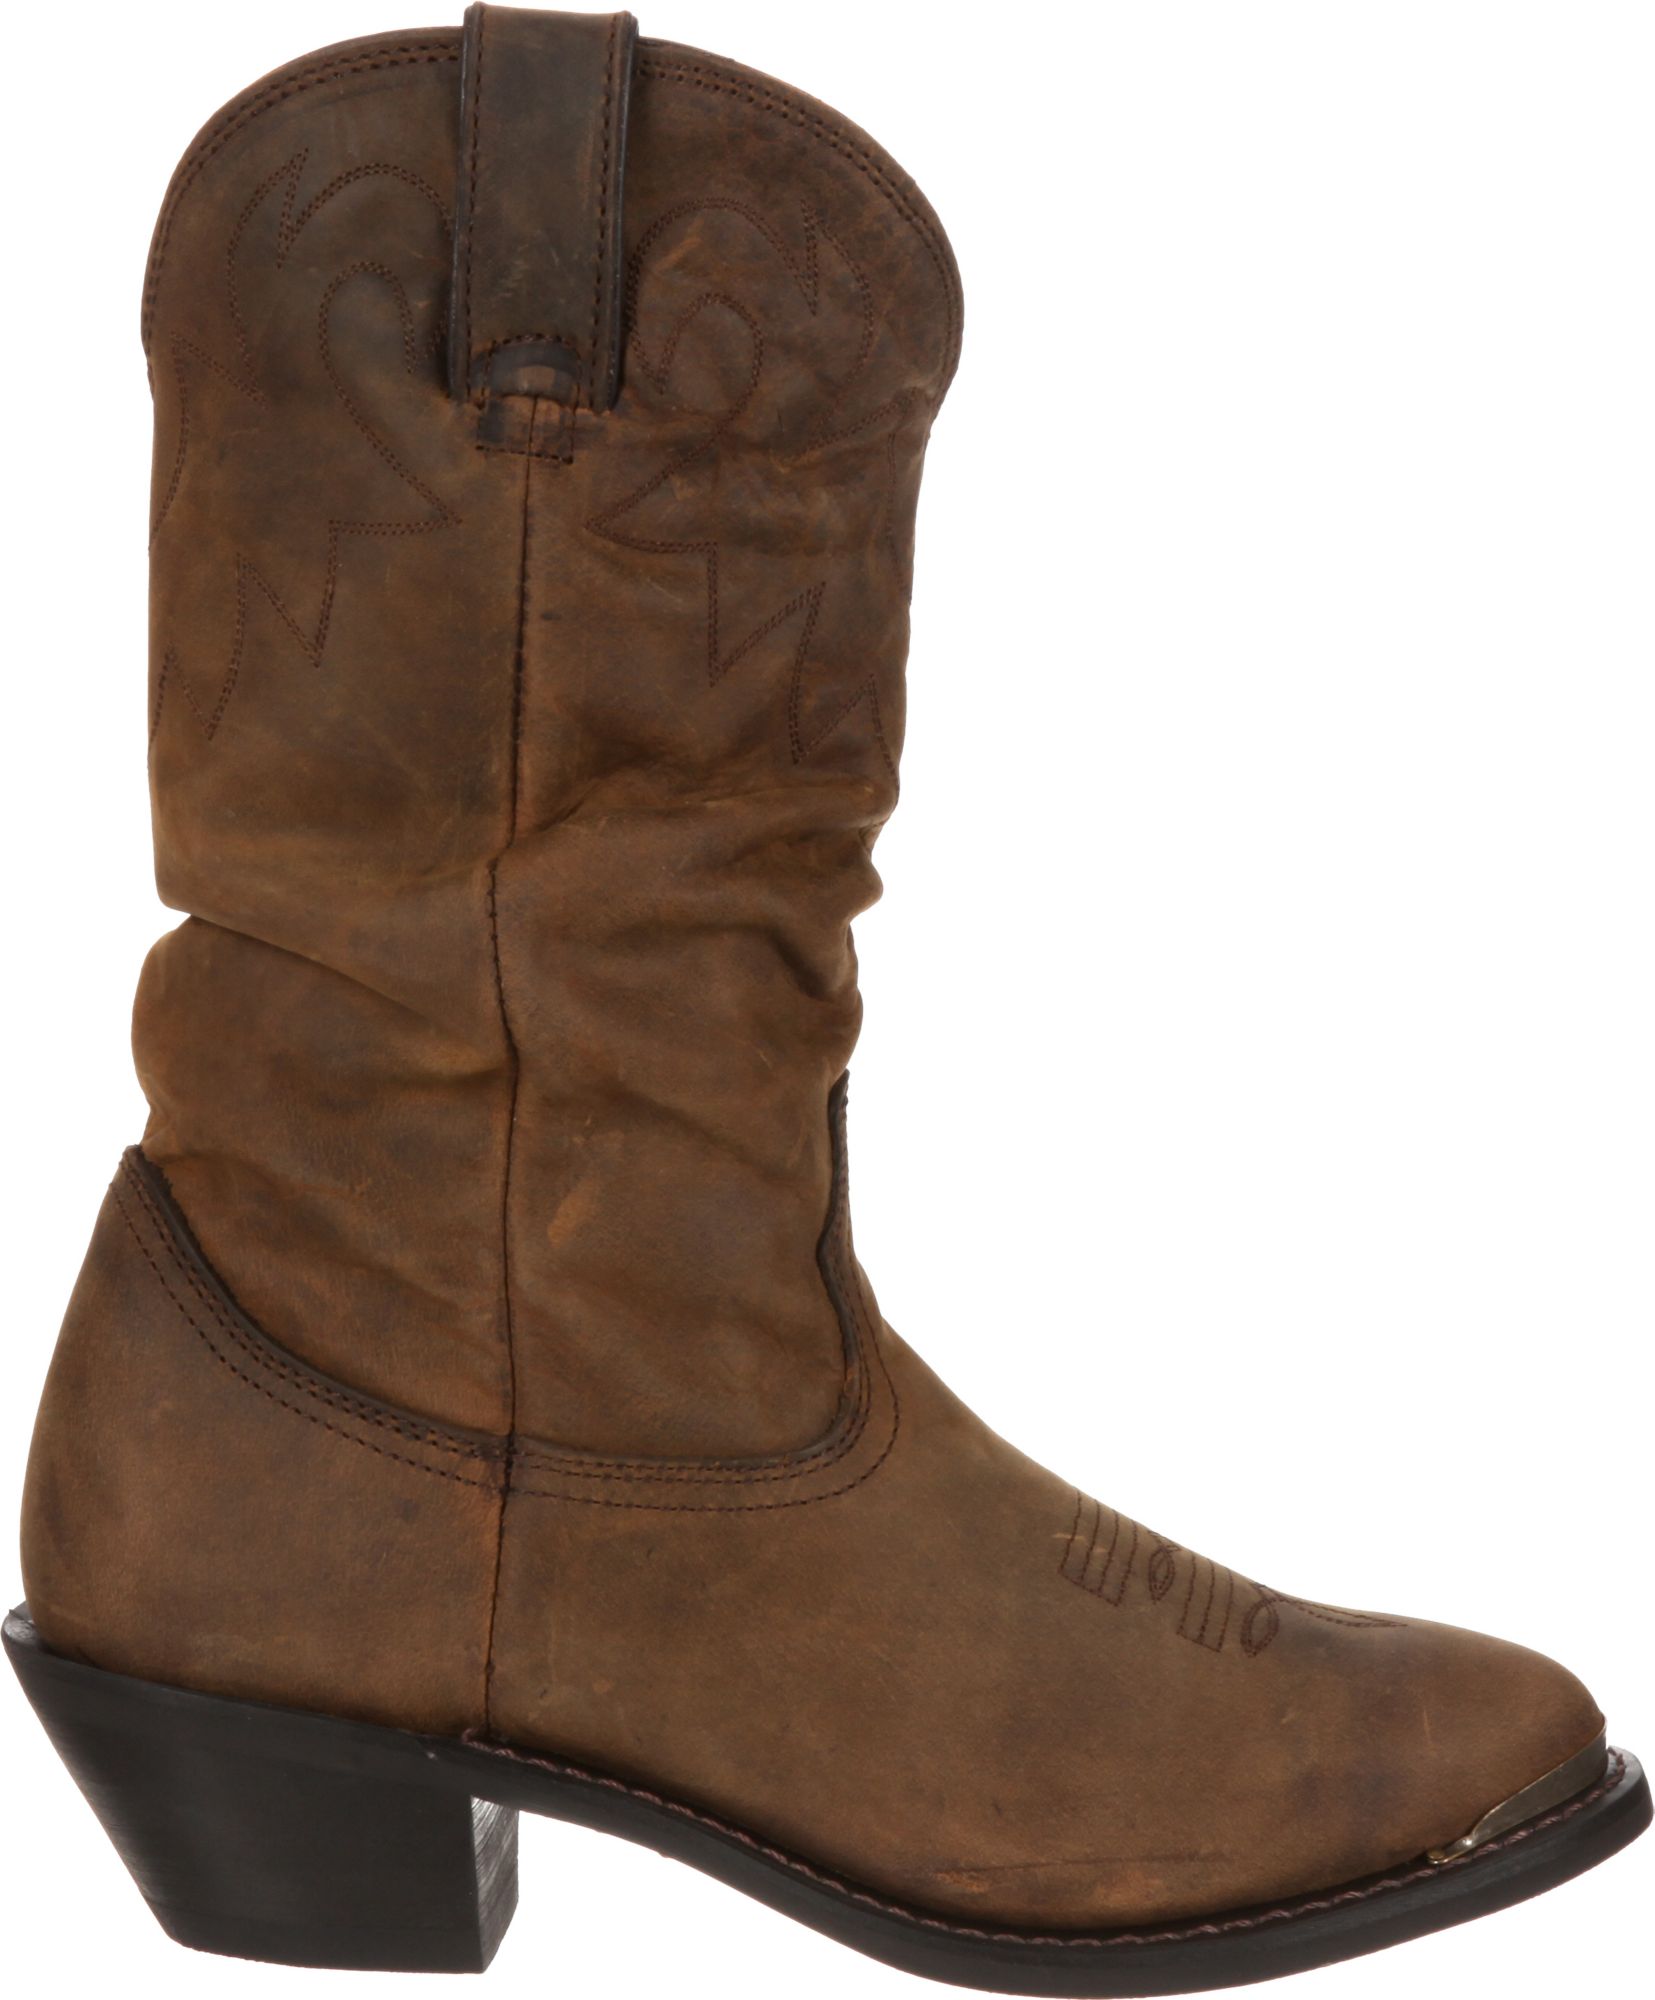 tan western boots